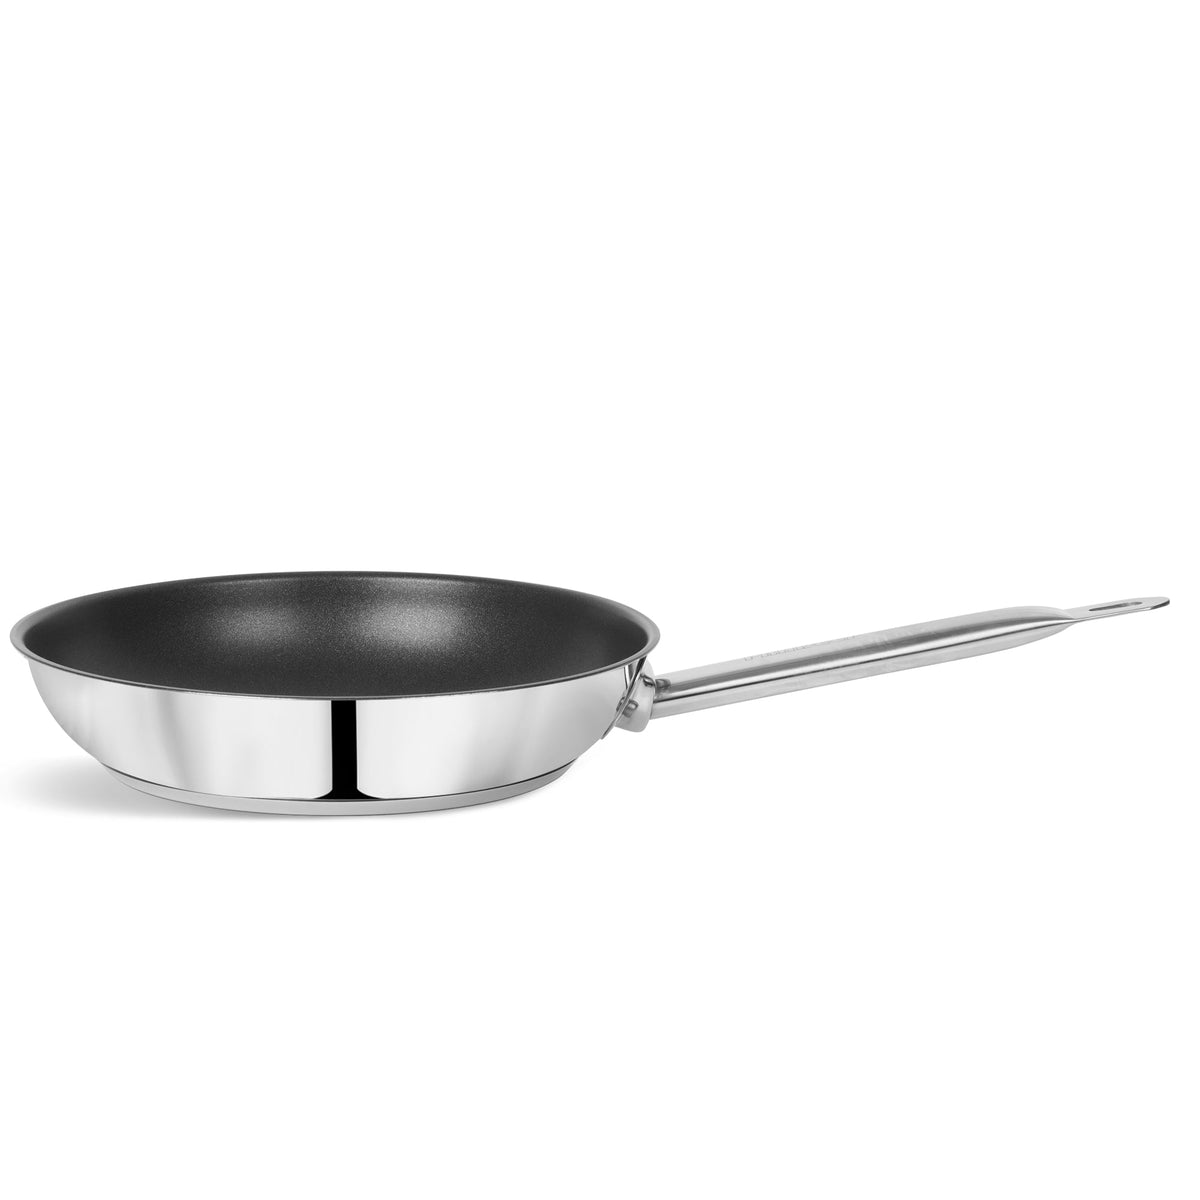 Pradeep AMICO Stainless Steel non Stick Frypan with Sandwich Bottom